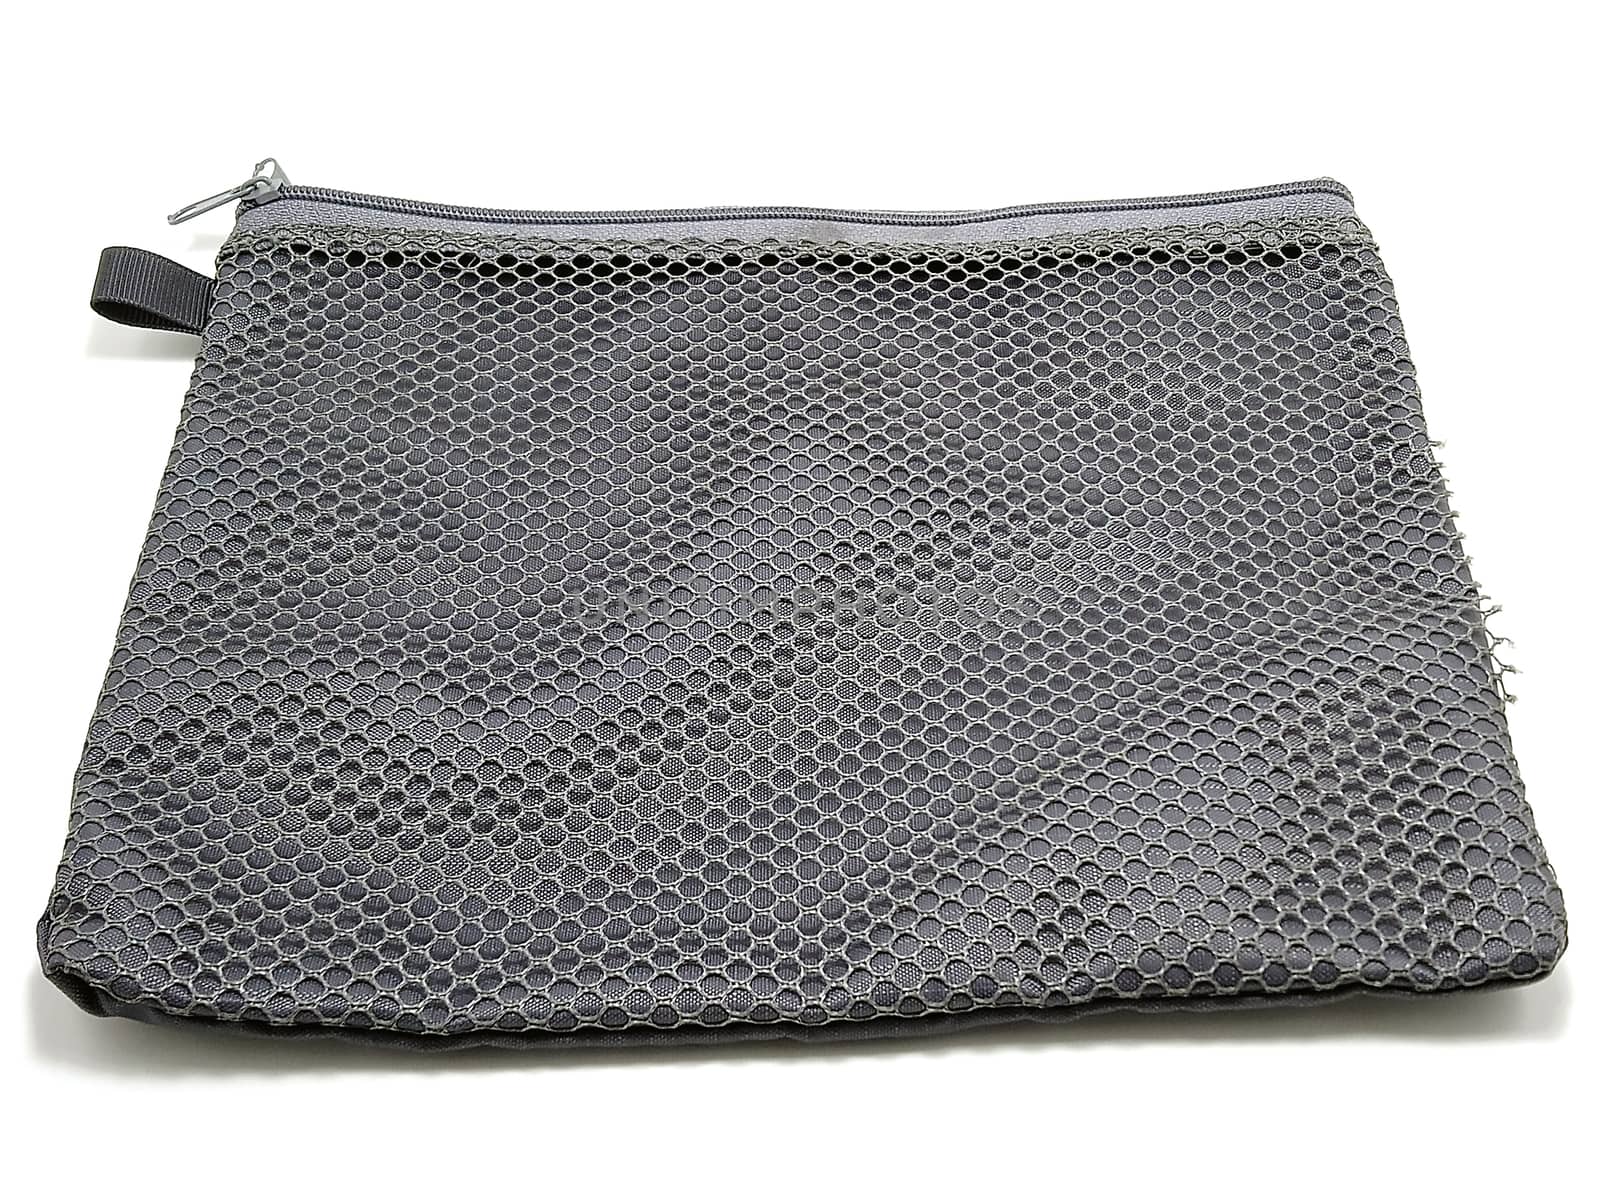 Small gray mesh bag with zipper by imwaltersy